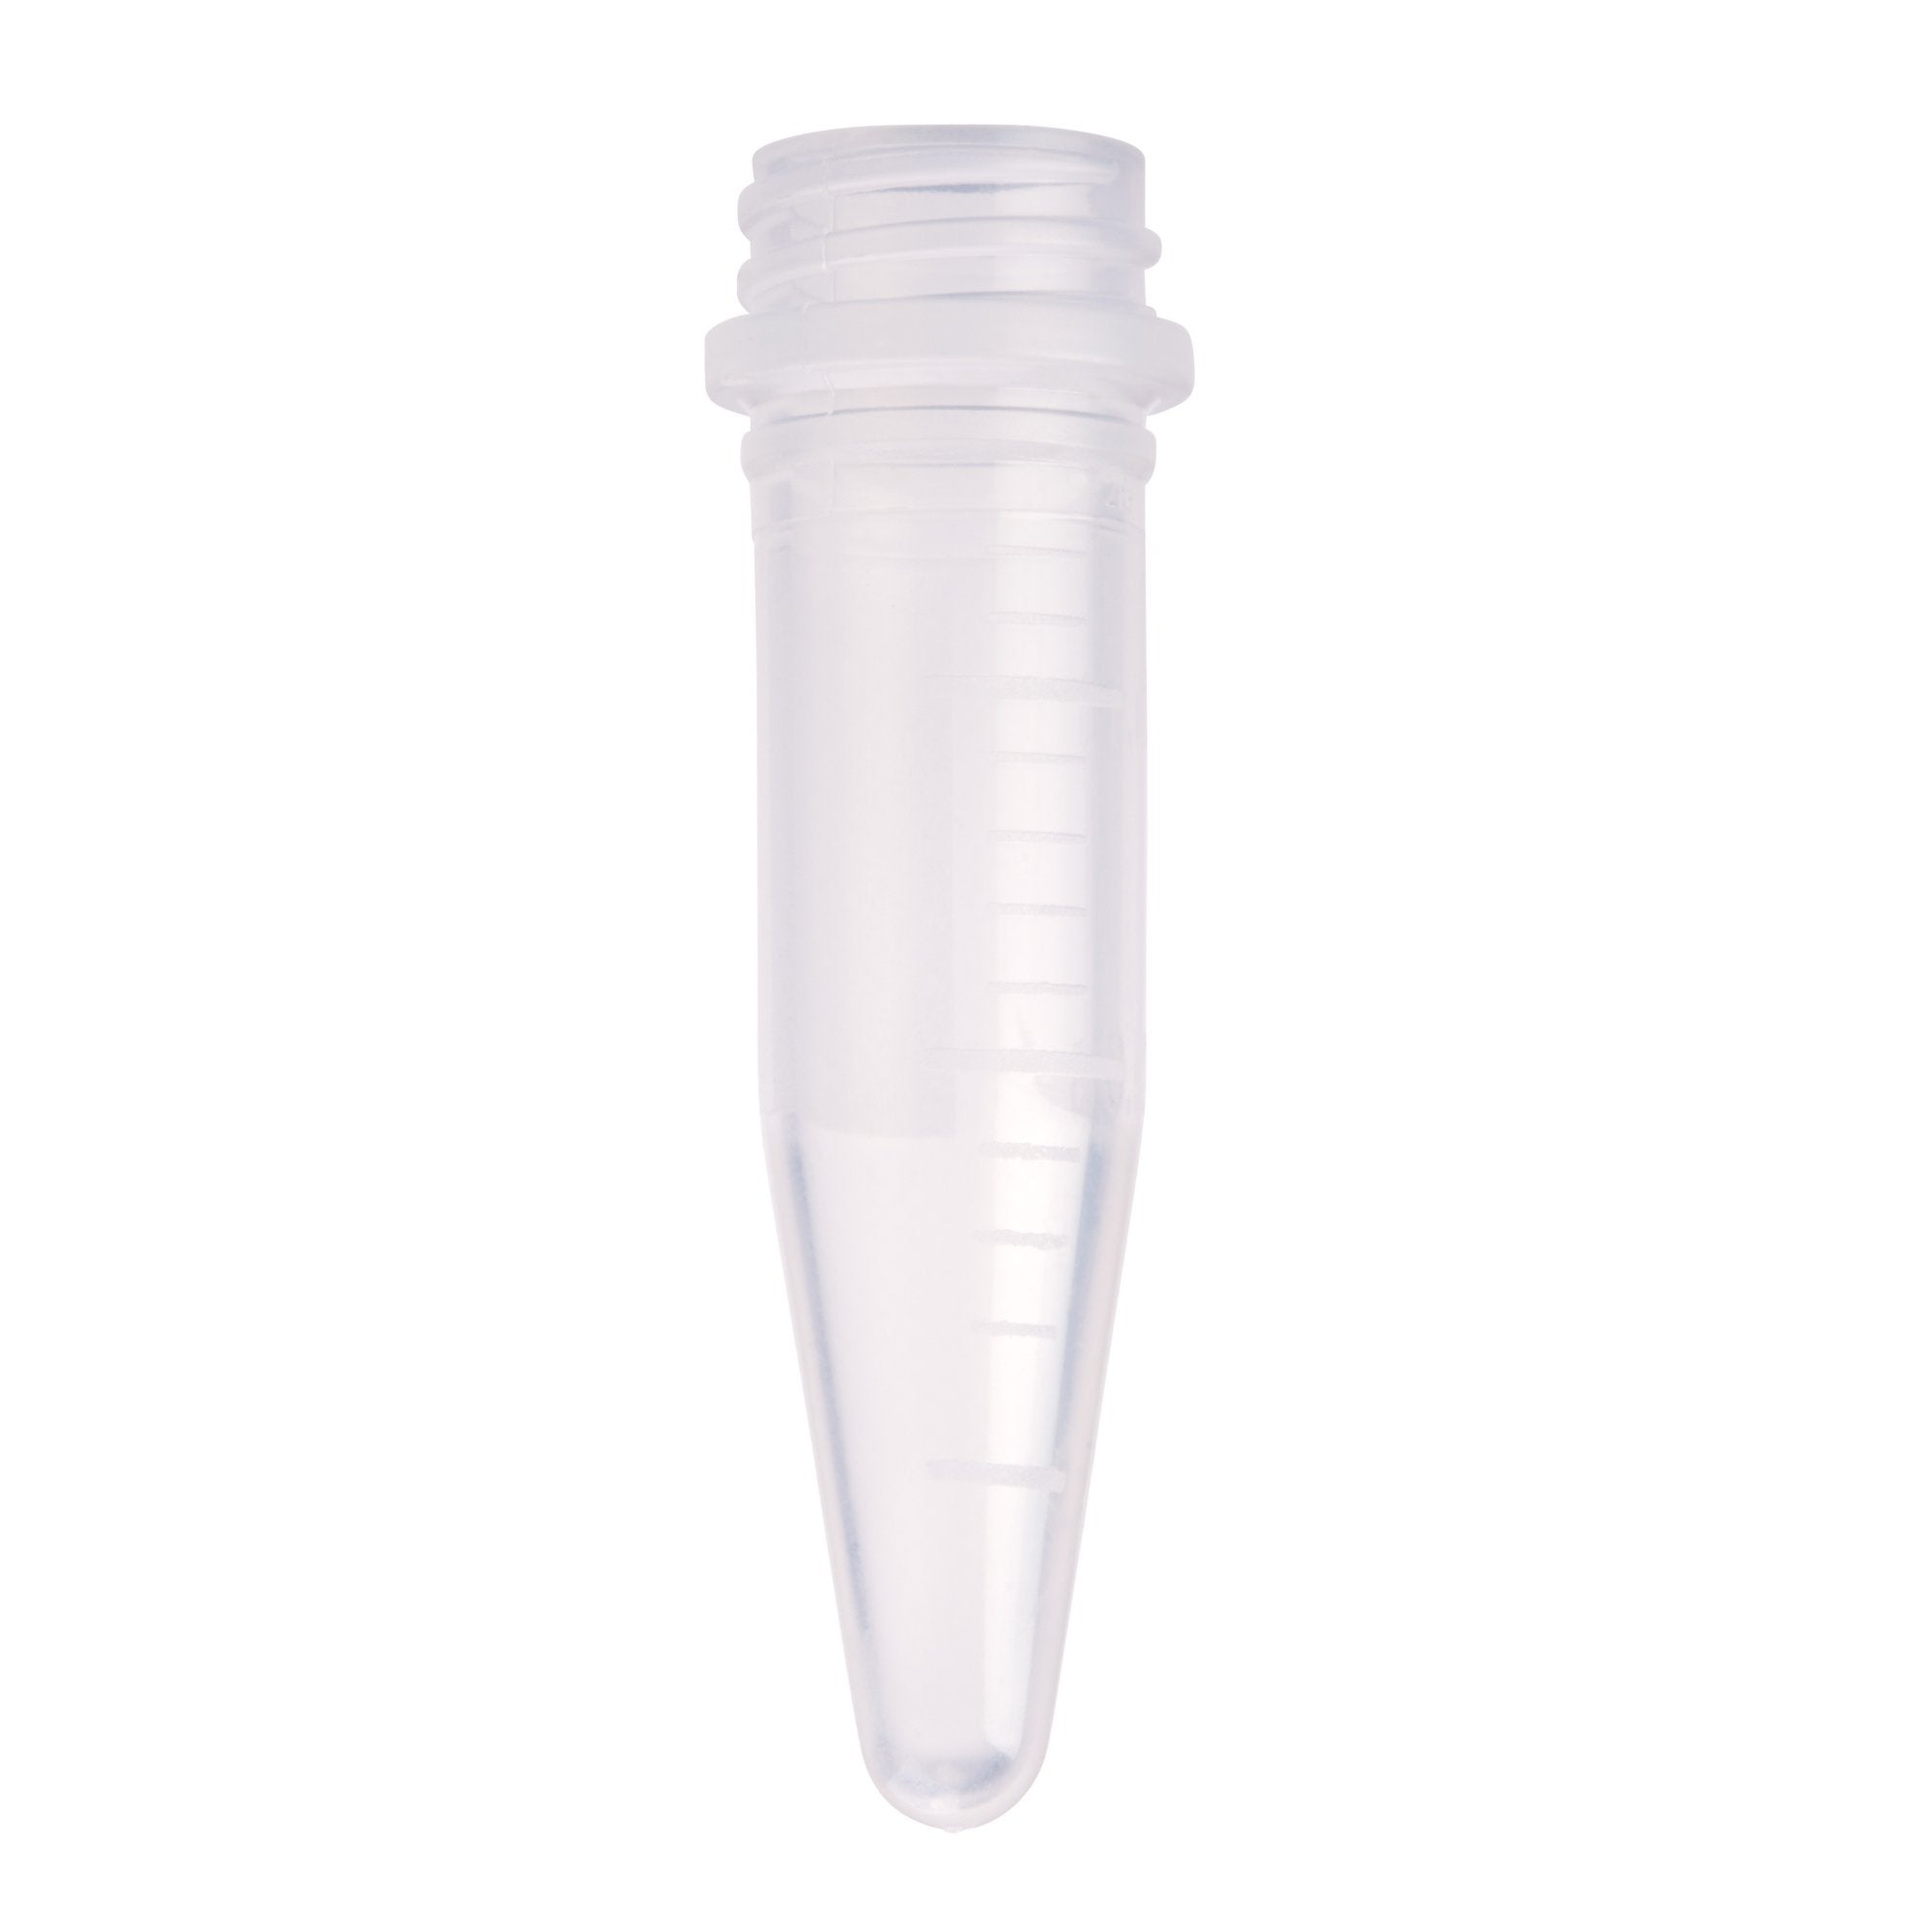 Celltreat 230823 Screw Top Micro Tubes TUBE ONLY